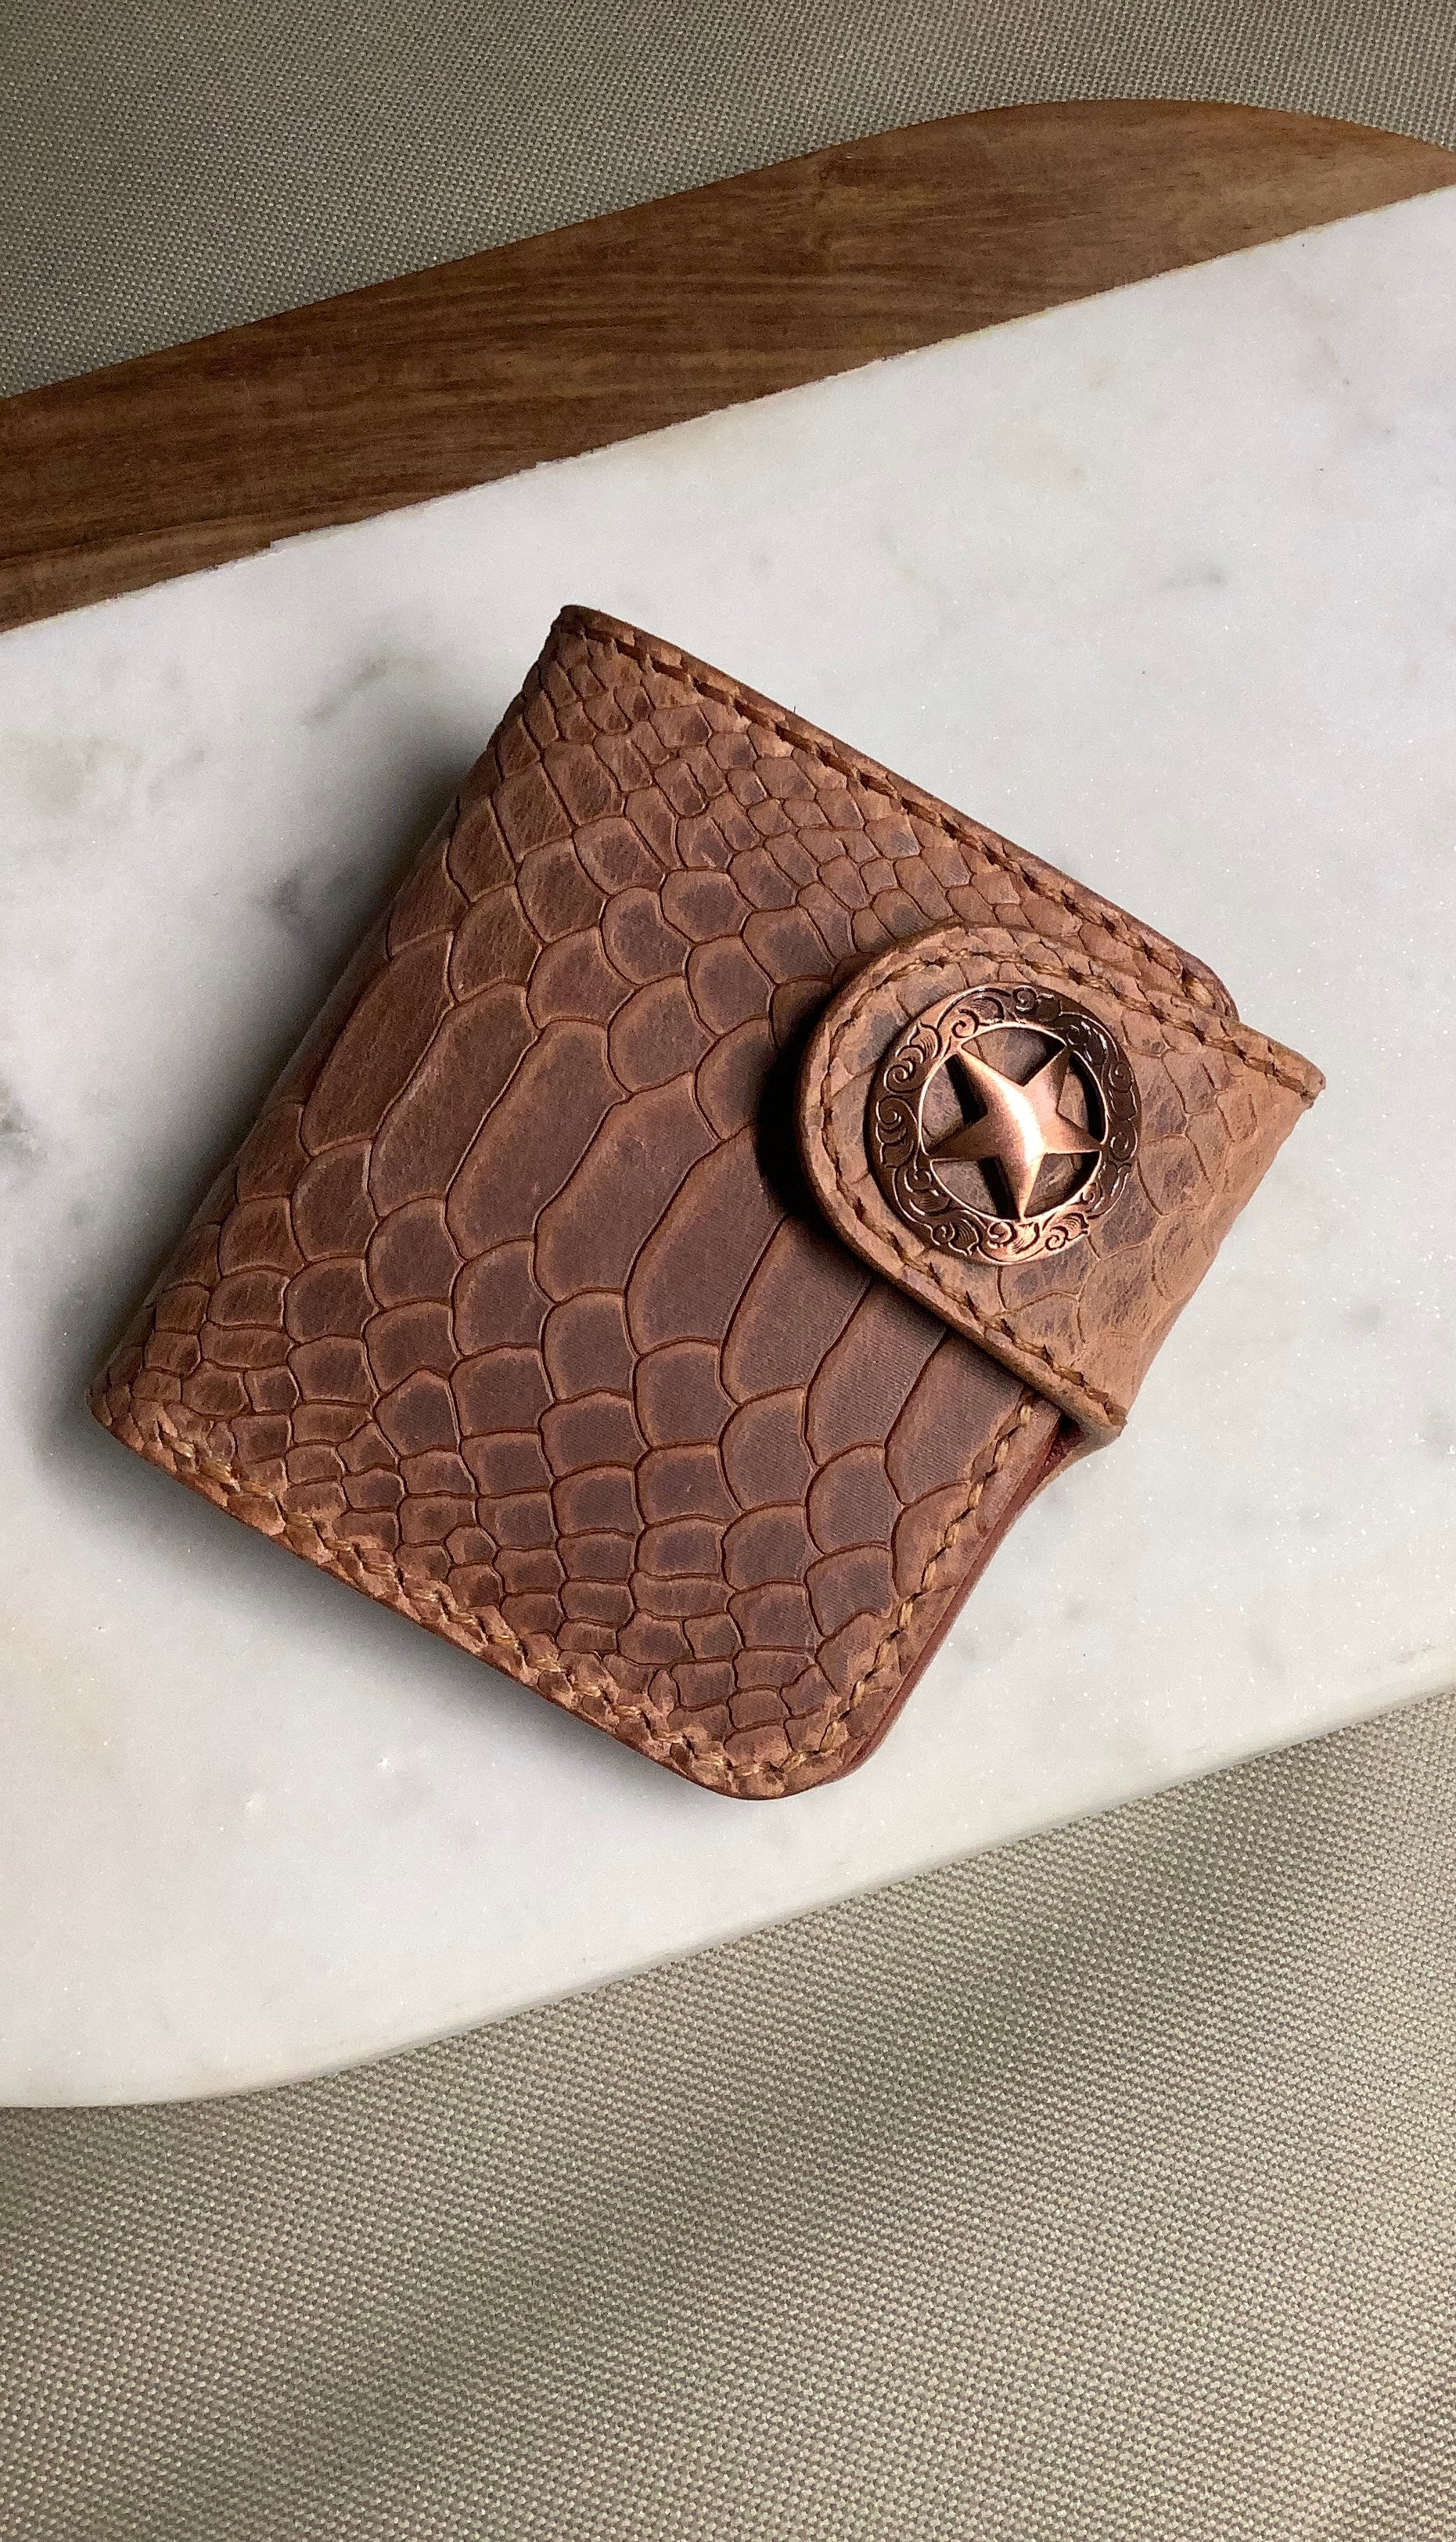 I-35 Leather - Bifold Snap Wallet - Natural Python Embossed Leather